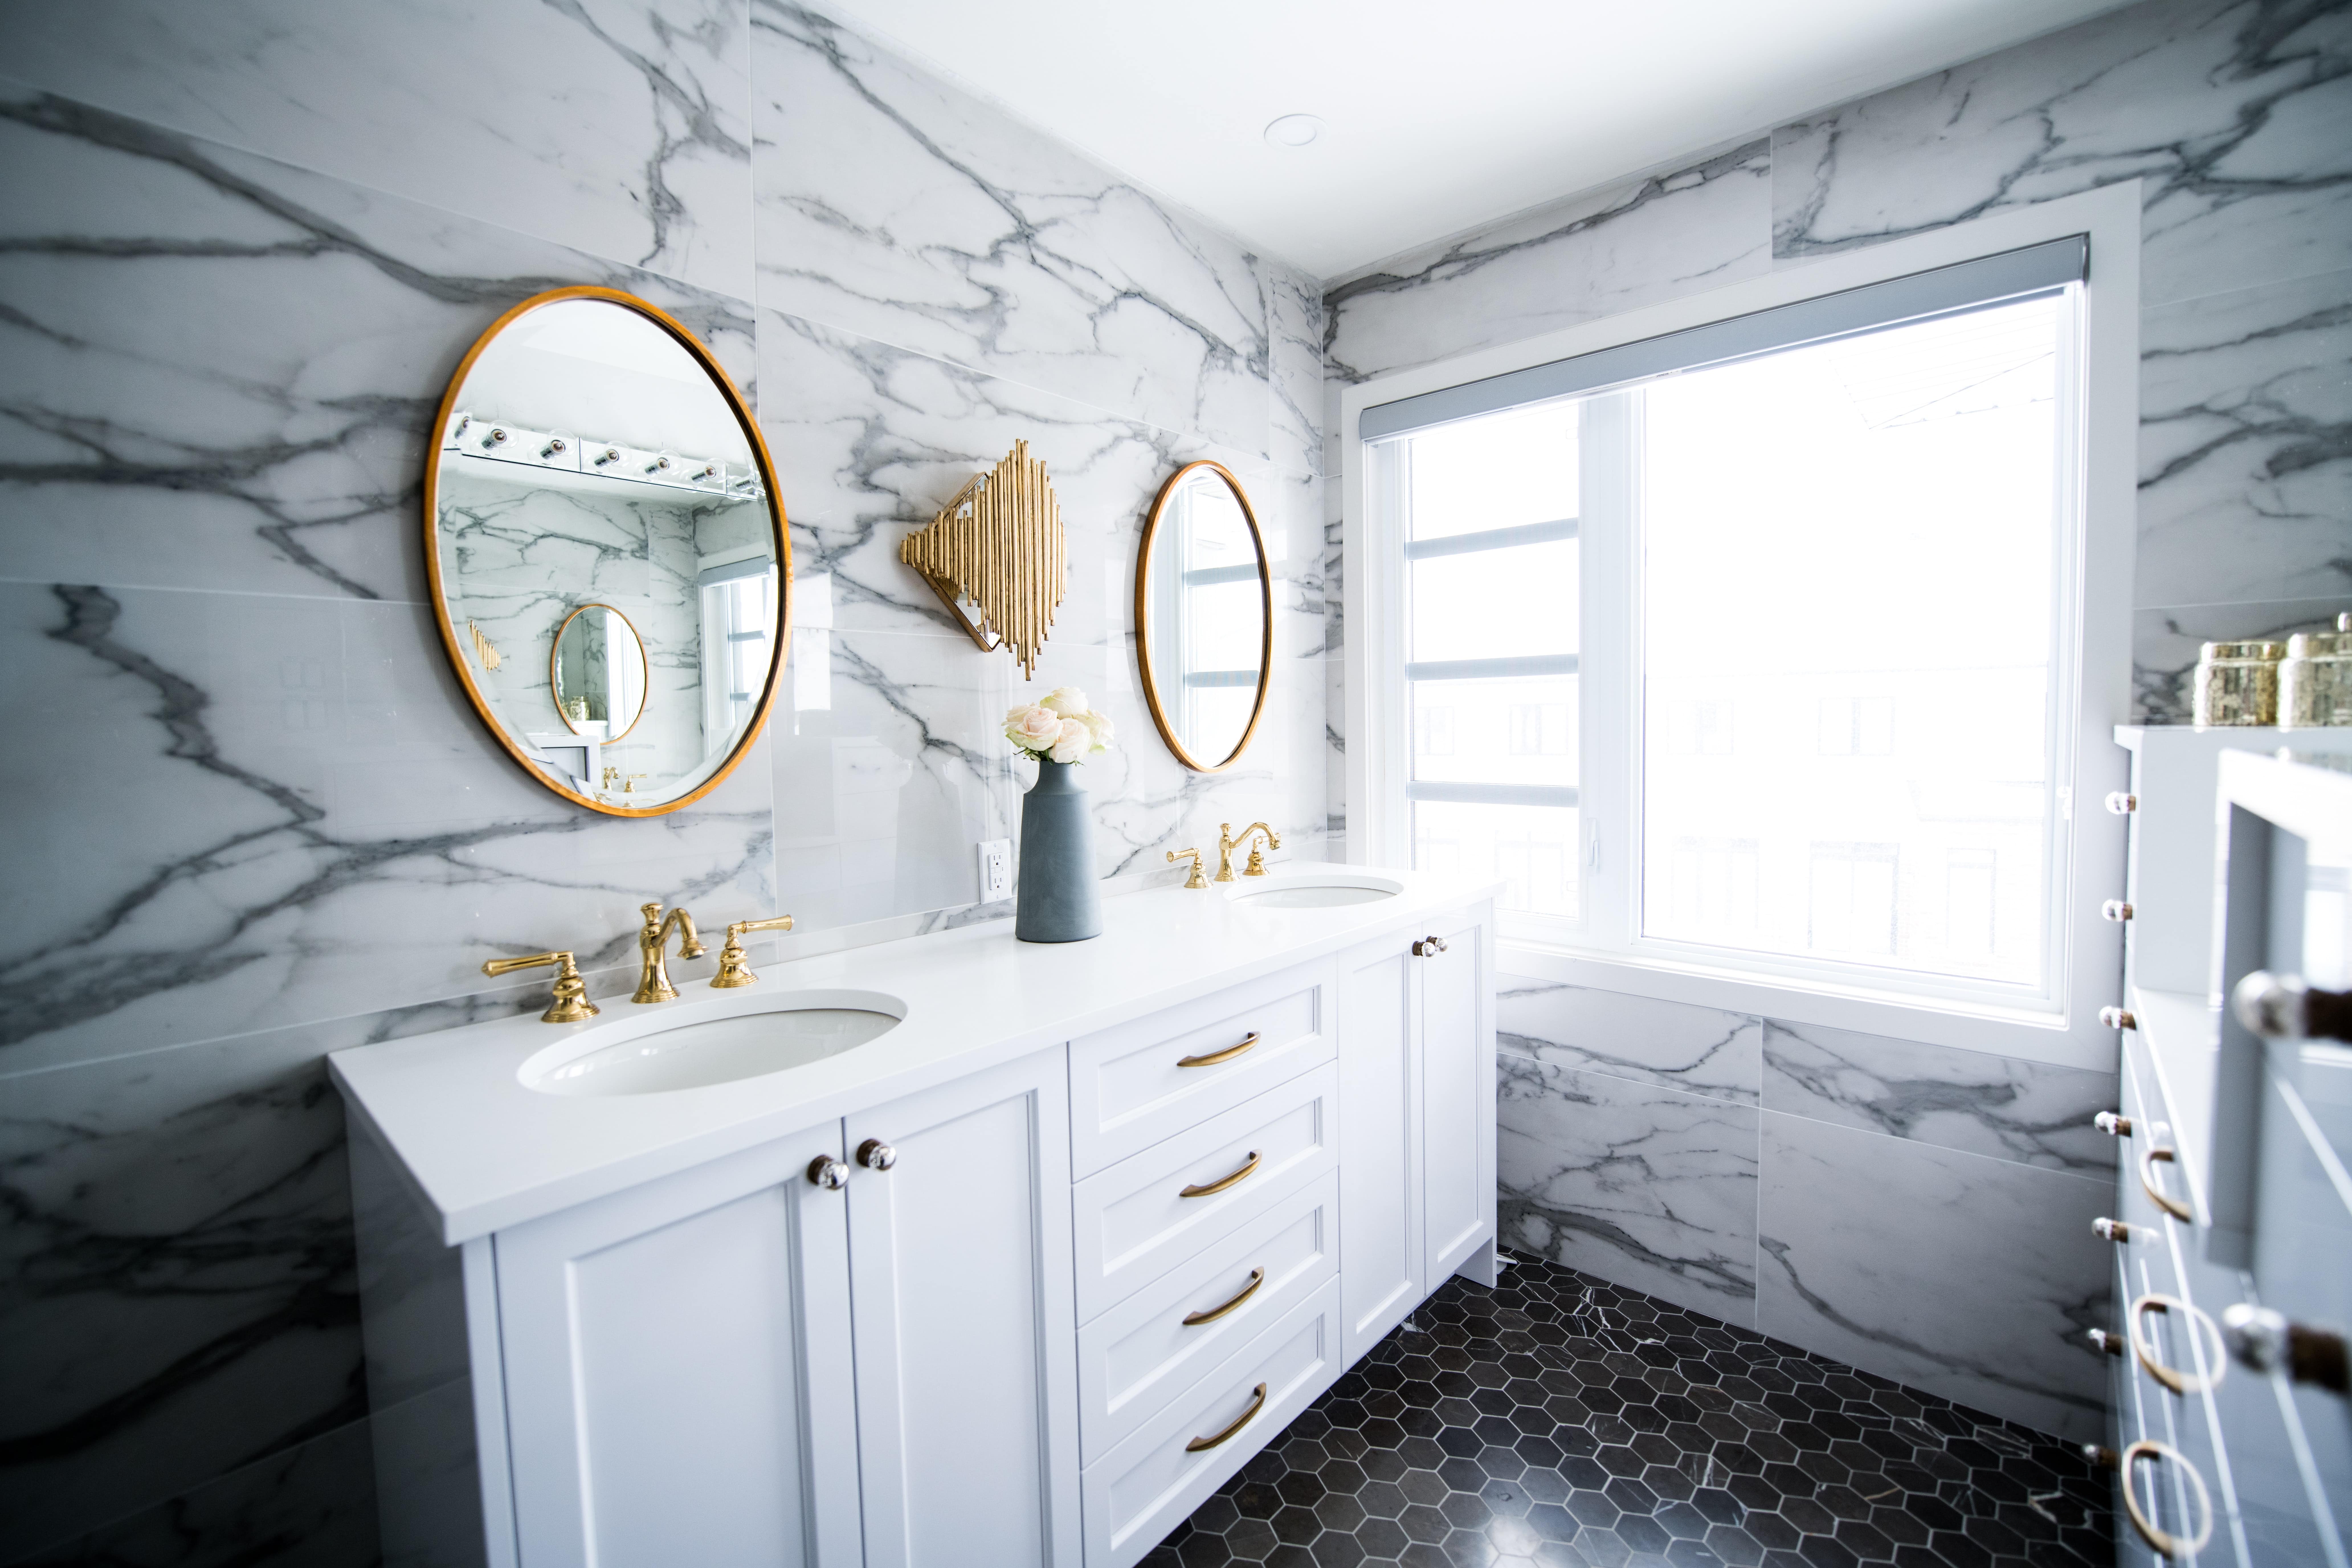 4 Bathroom Remodeling Tips to Know Before You Begin Your Project